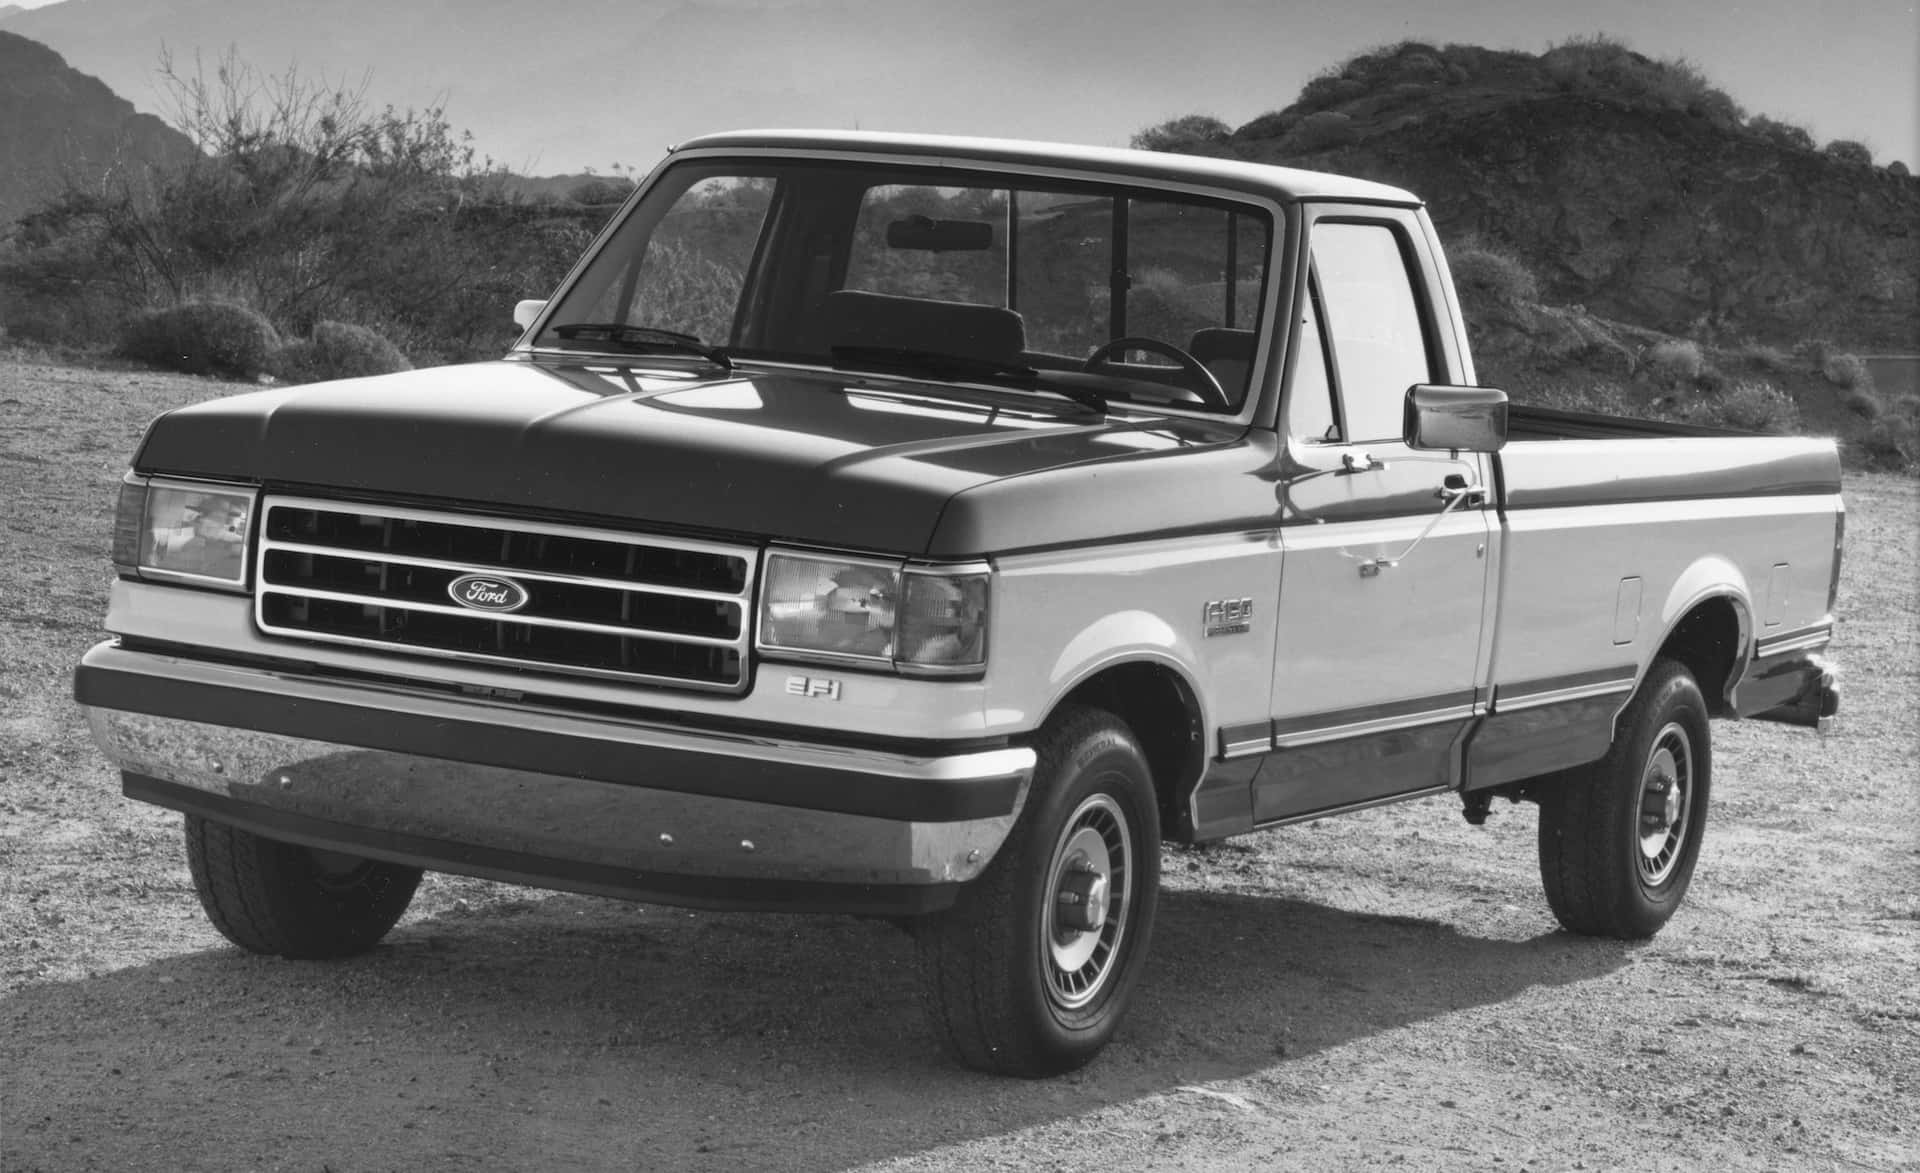 Get Ready for Your Next Adventure in the Ford Truck